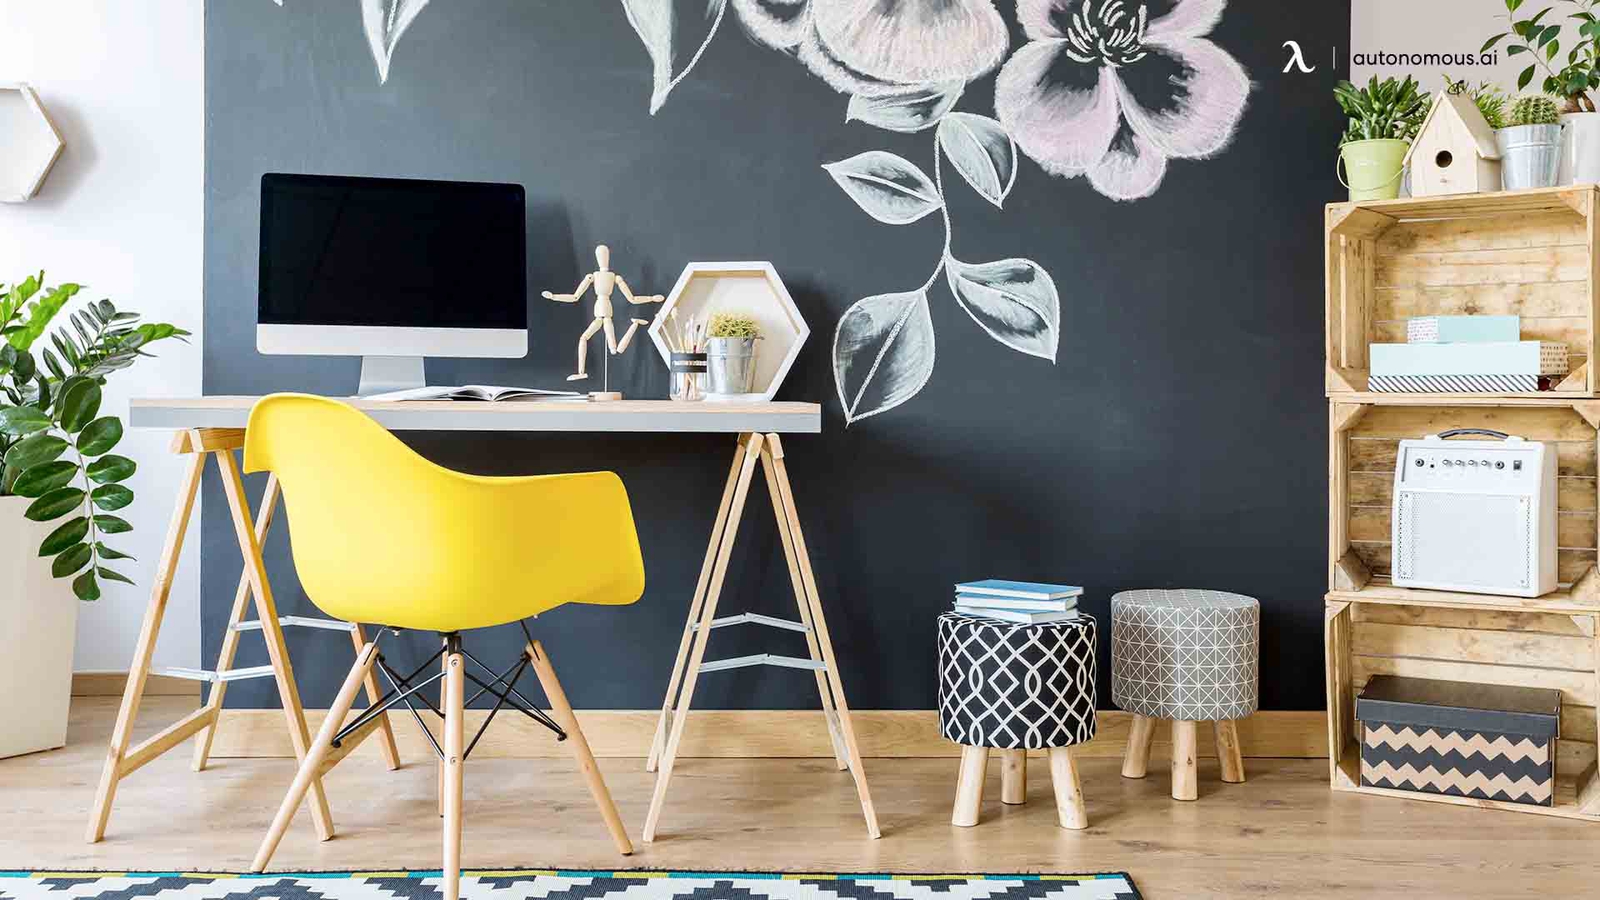 Top 8 Small Chairs for Small Spaces Available in the UK Market